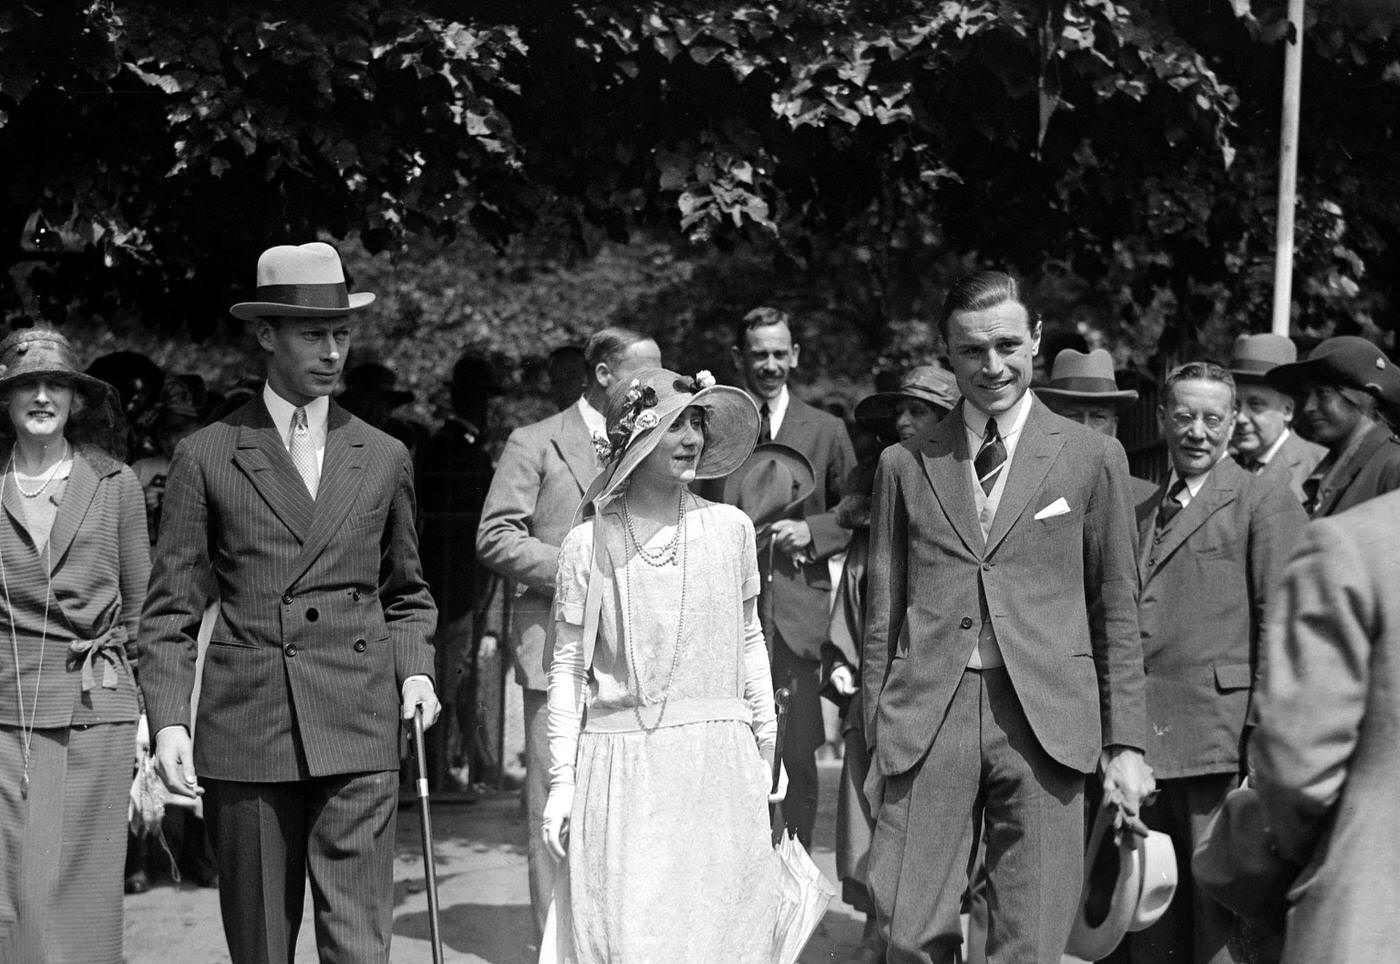 Duke of York (later King George VI) and Elizabeth Bowes-Lyon at a wedding in Loughton, Essex